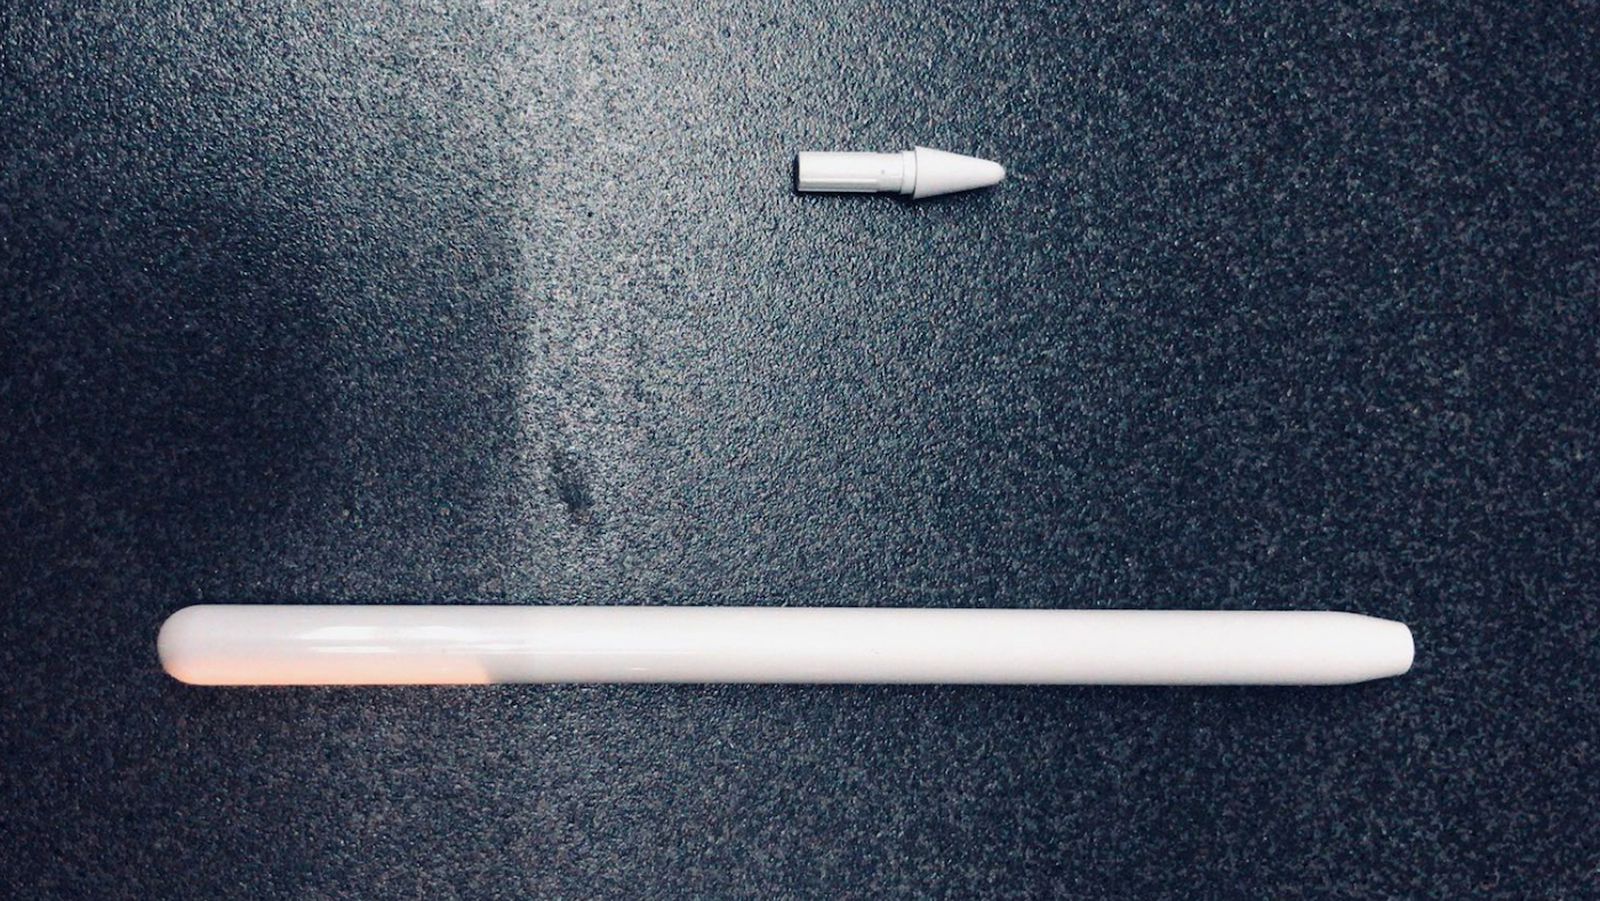 It looks like the new Apple pencil is leaking with a glossy finish and redesigned tip